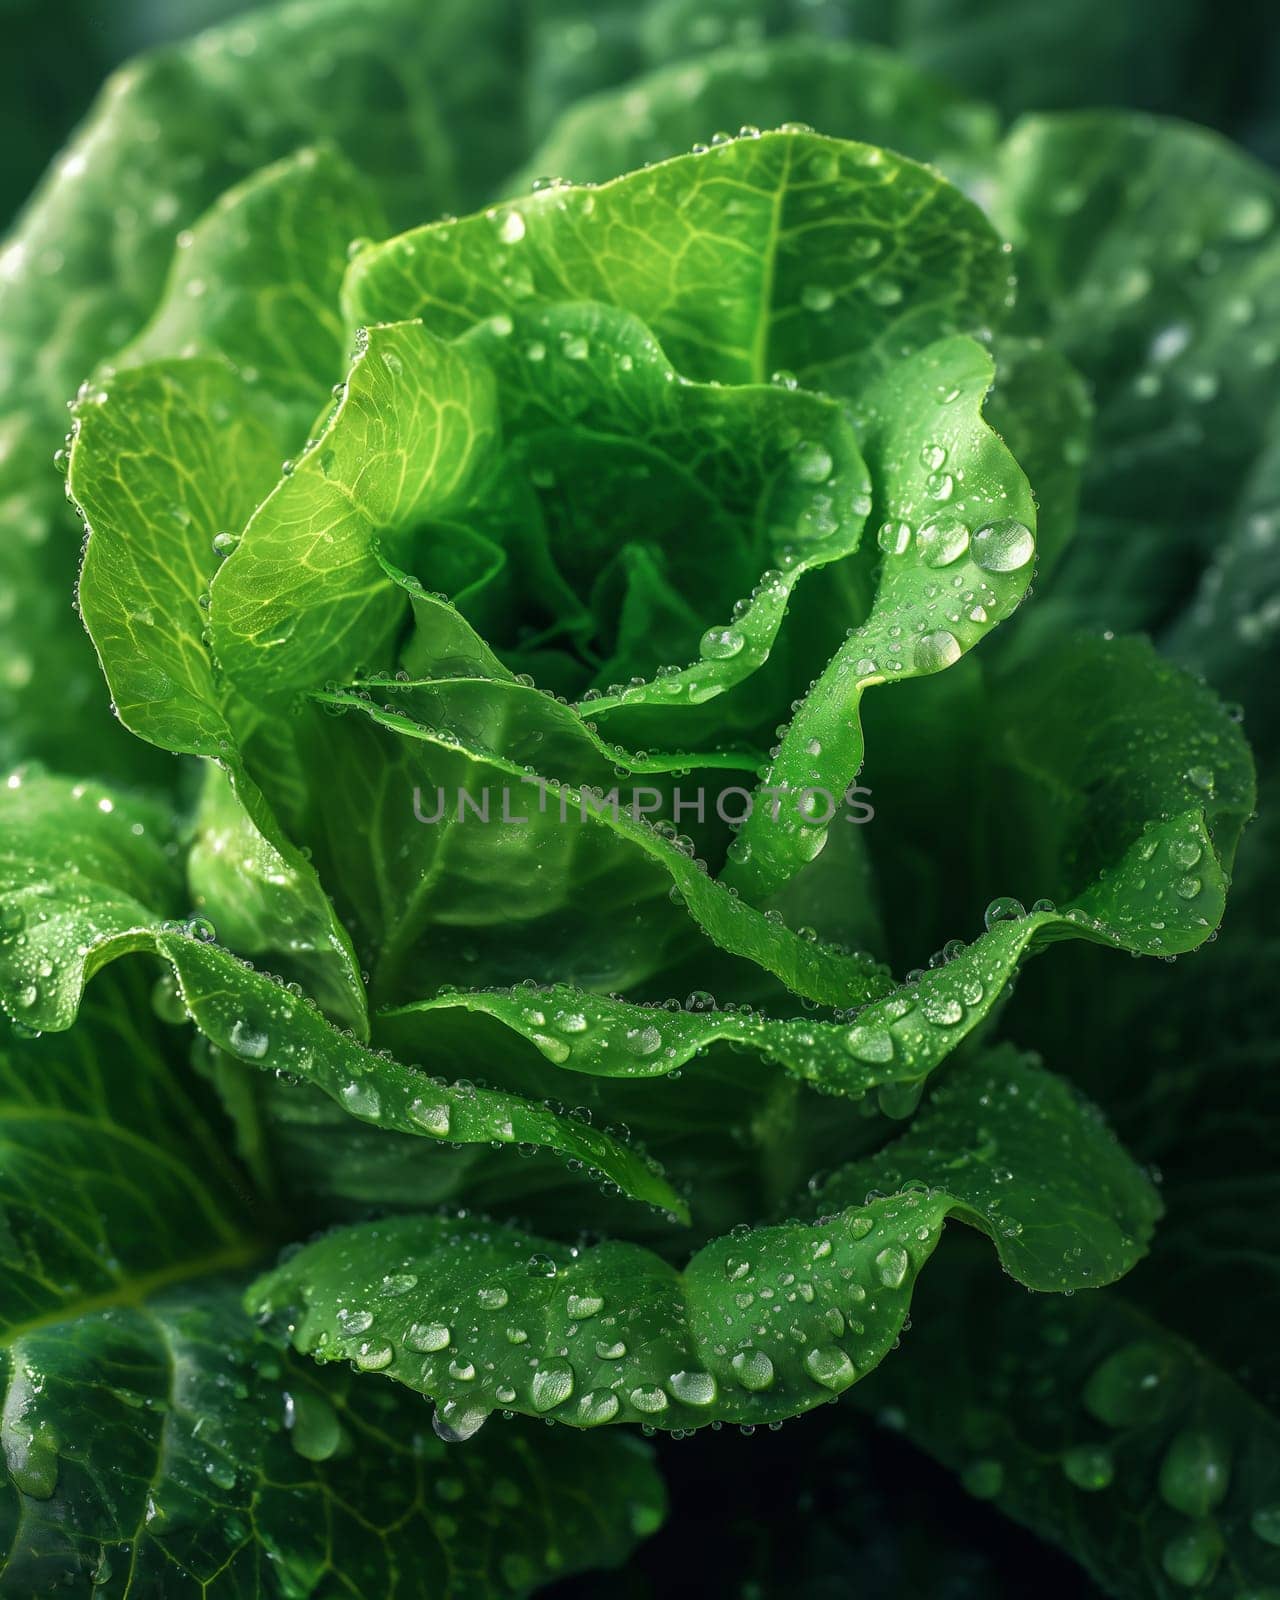 Close-up of green head lettuce. Selective focus.